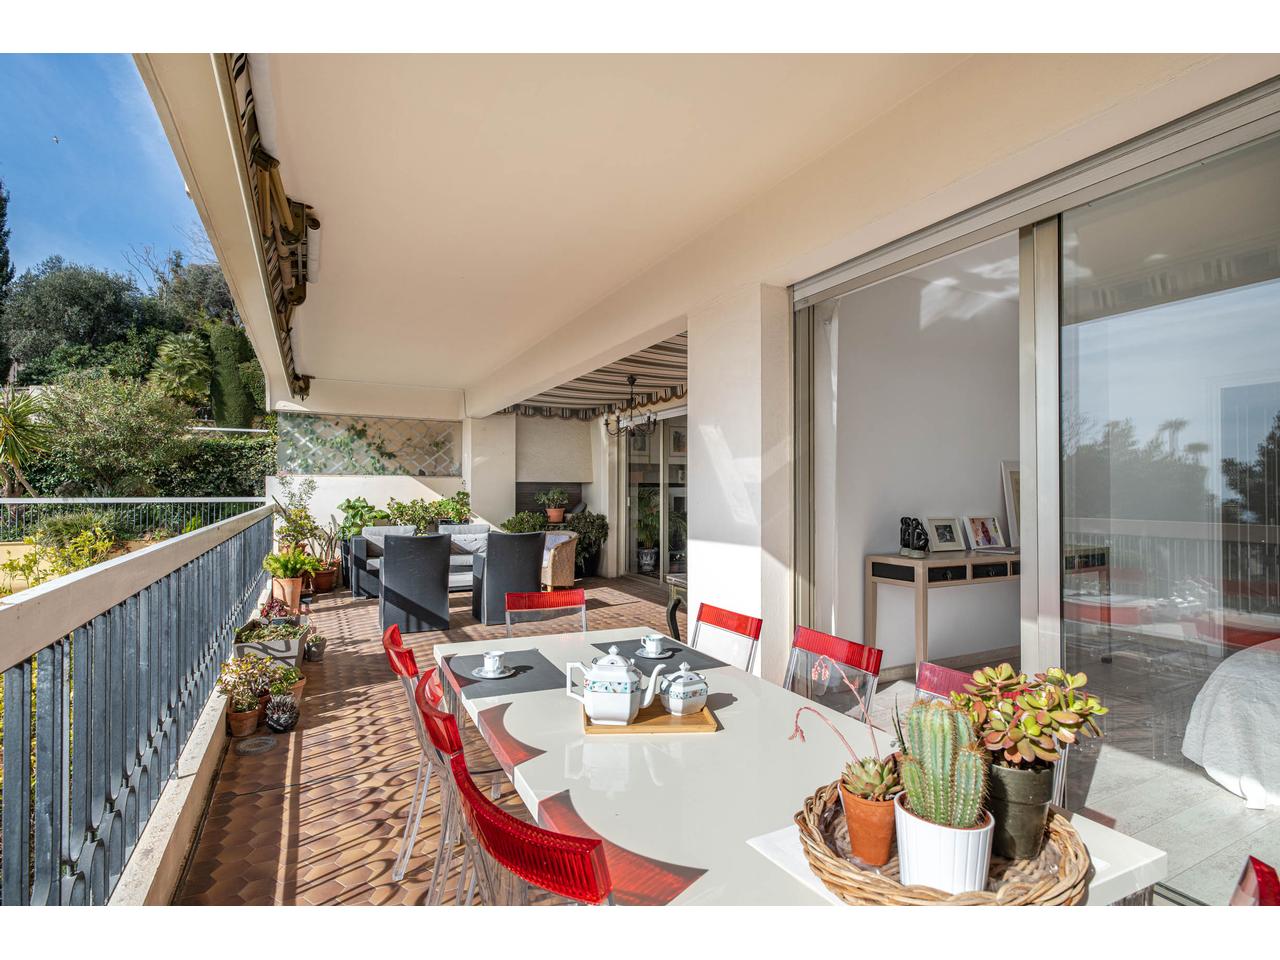 Nice Riviera - Agence Immobiliére Nice Côte d'Azur | Appartement  3 Rooms 109.49m2  for sale   735 000 €